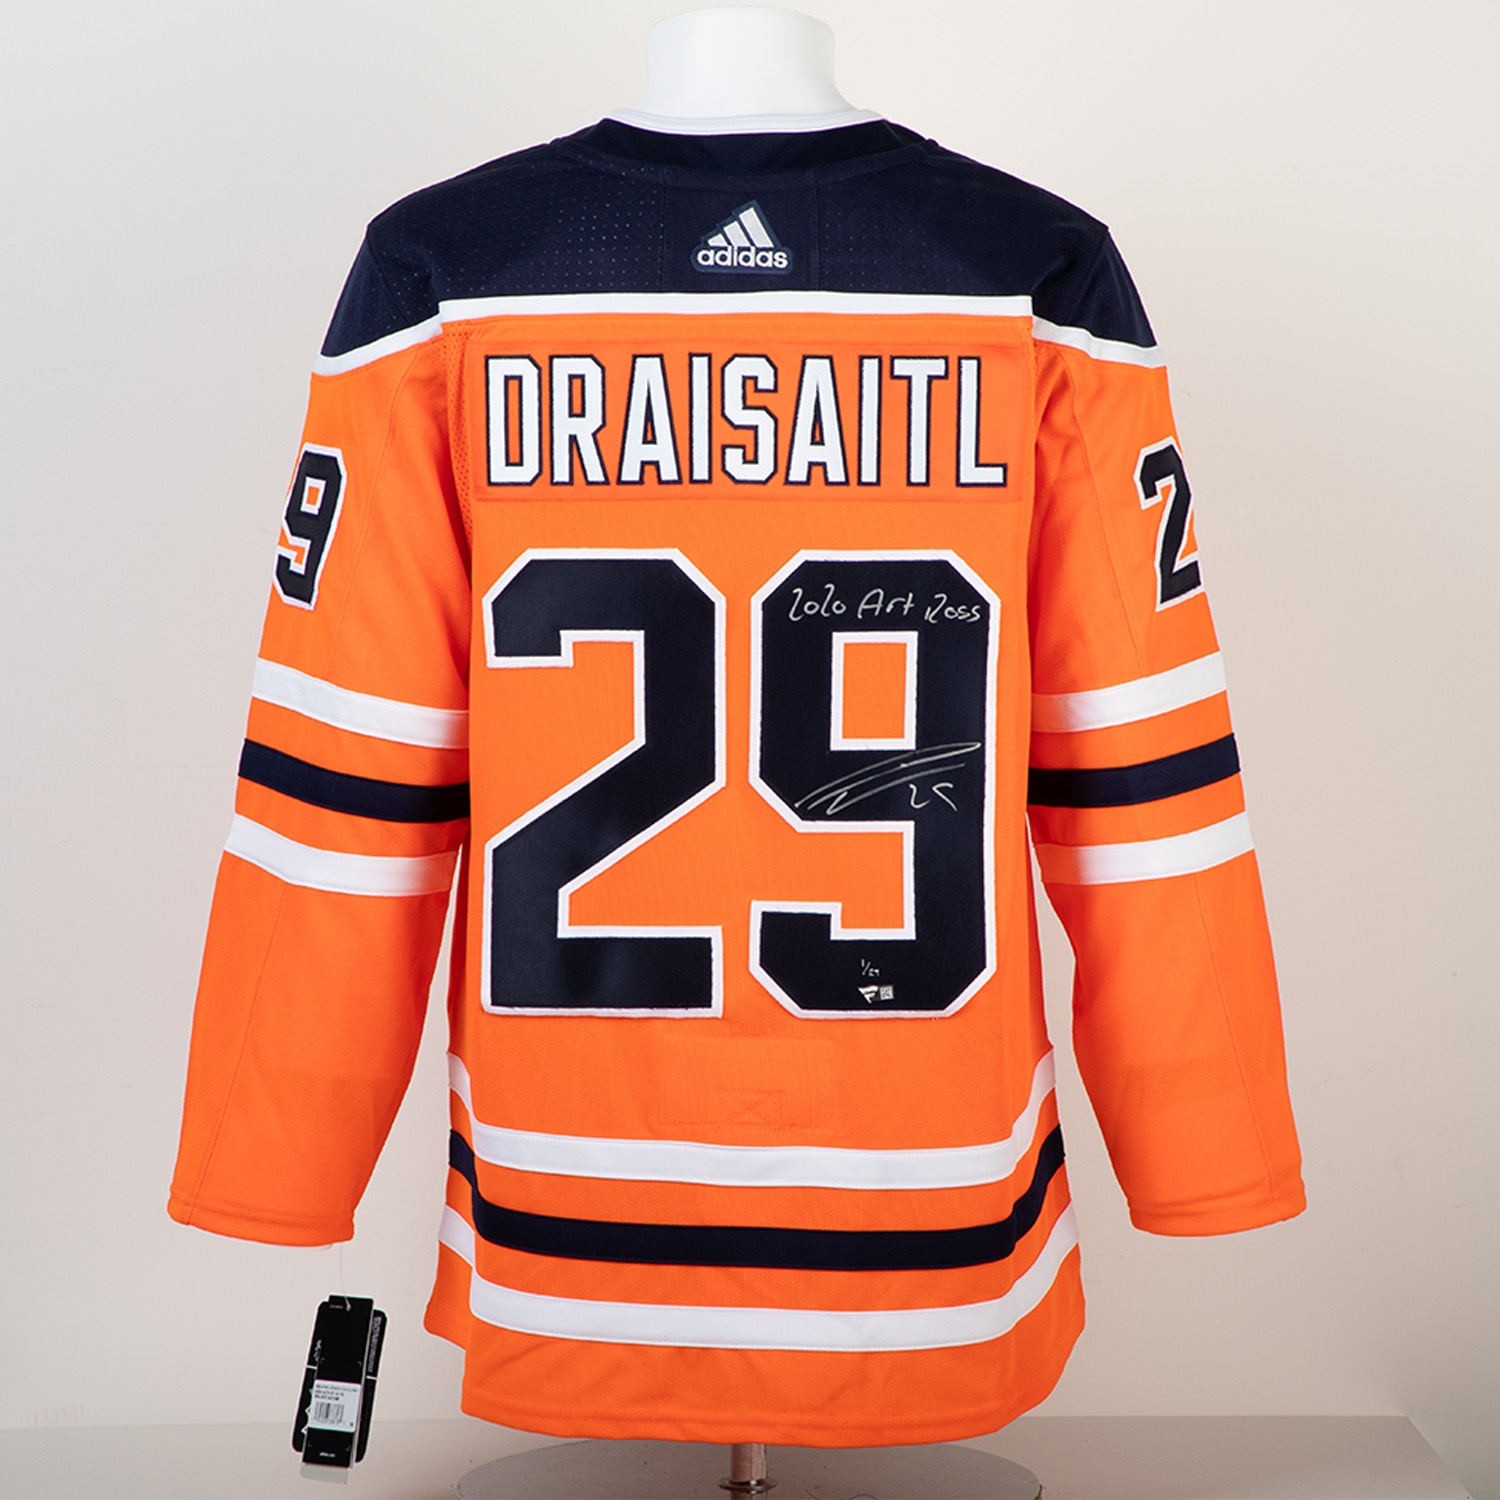 Leon Draisaitl Edmonton Oilers Autographed Adidas Jersey With Art Ross Note 1/29